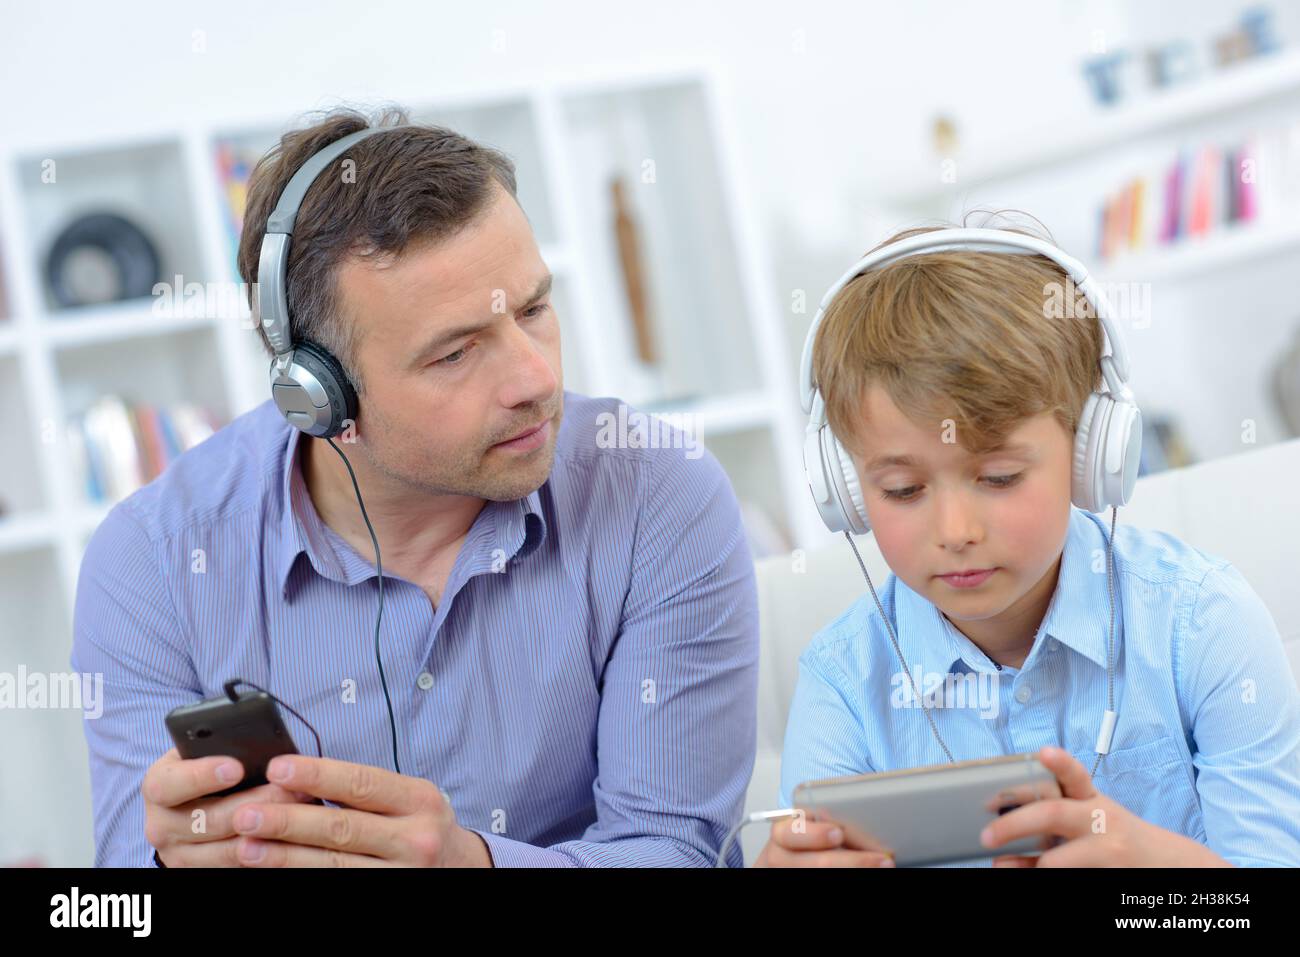 little boy is using his dads phone Stock Photo